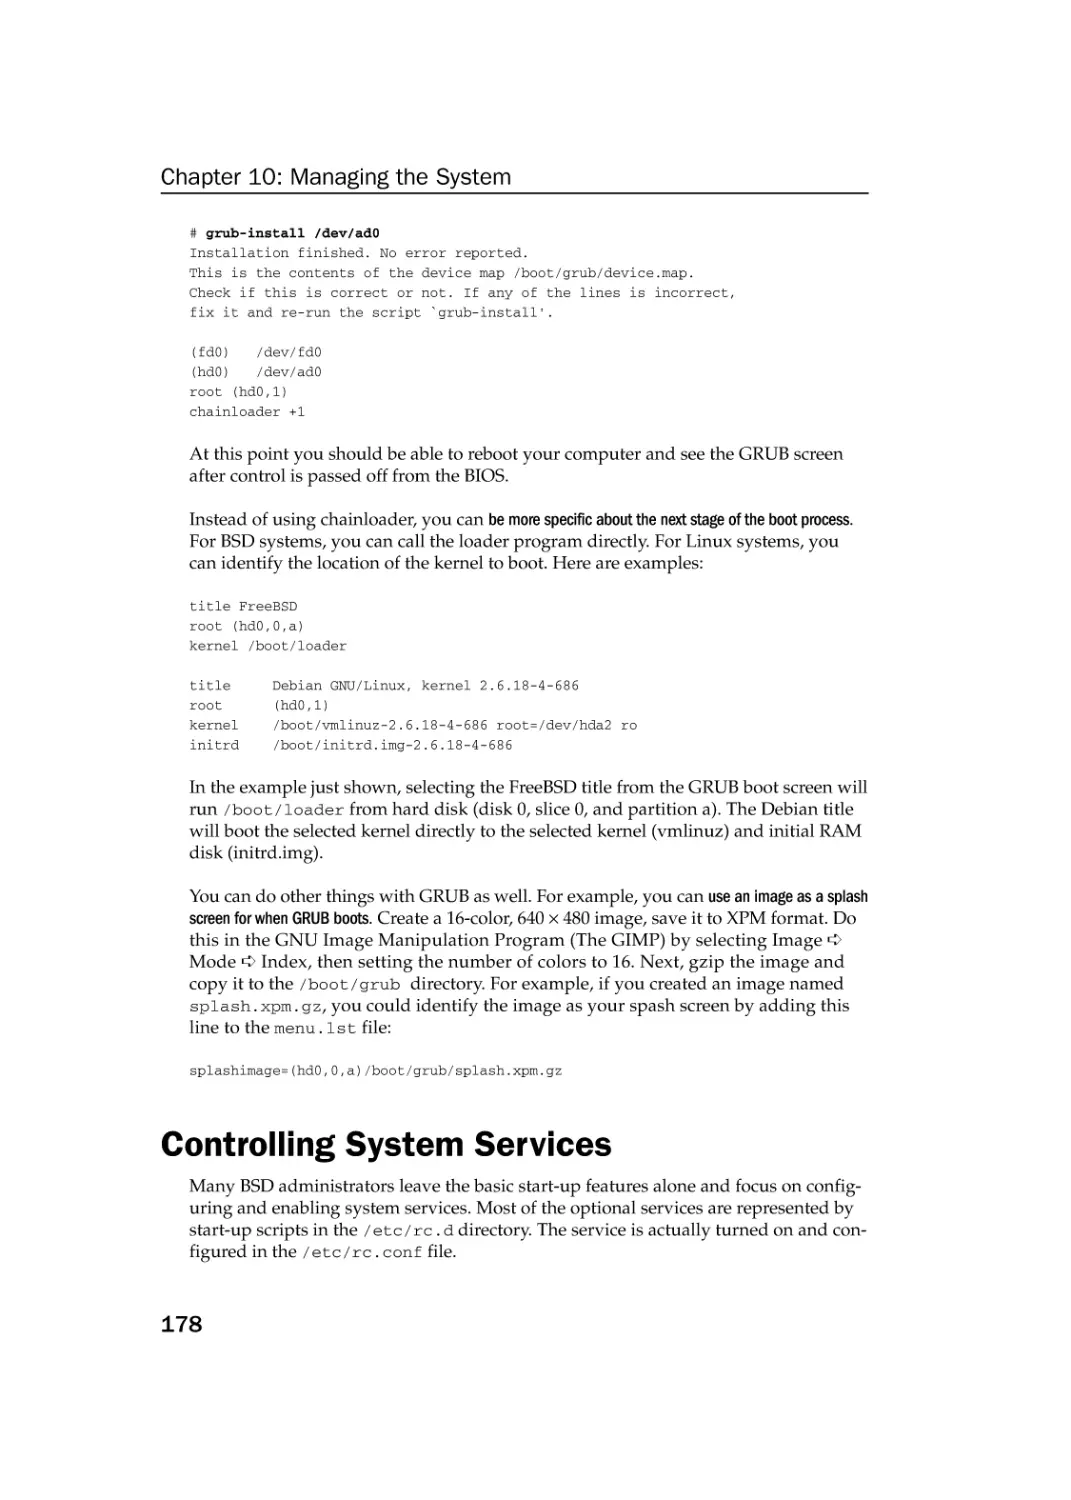 Controlling System Services